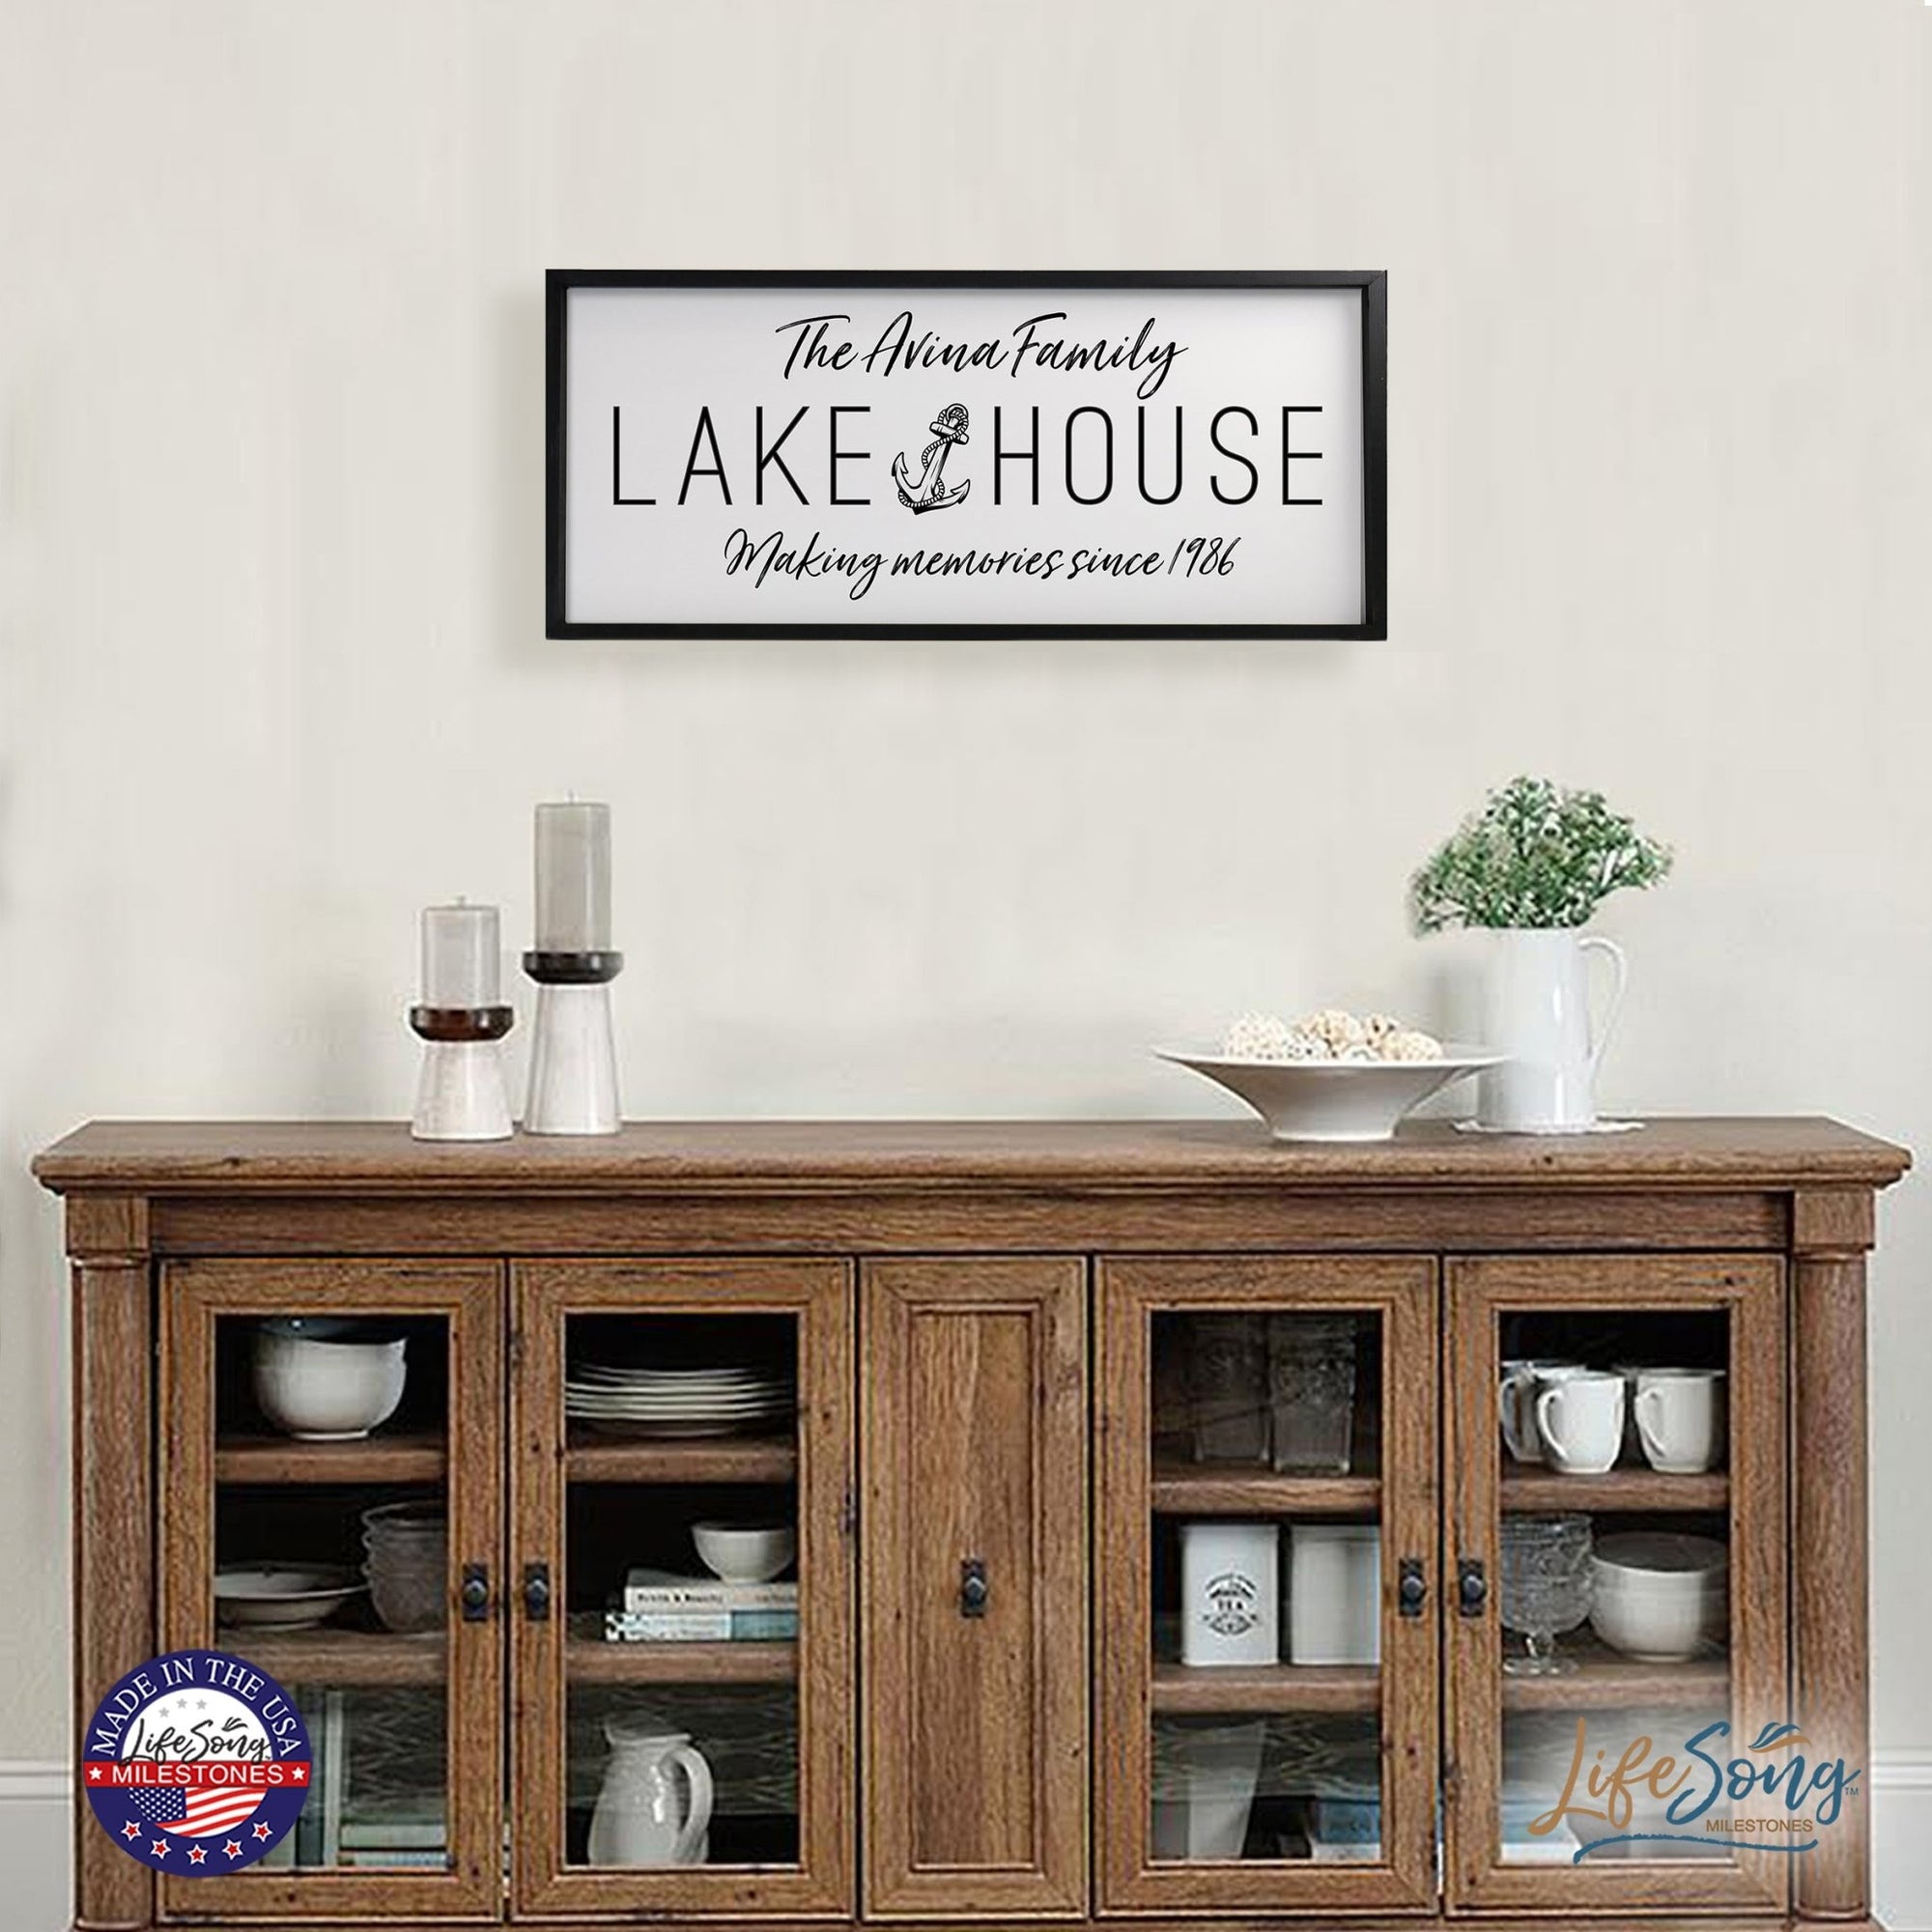 Inspirational Personalized Framed Shadow Box 13x30 - The Lake House Making Memories (Anchor) - LifeSong Milestones